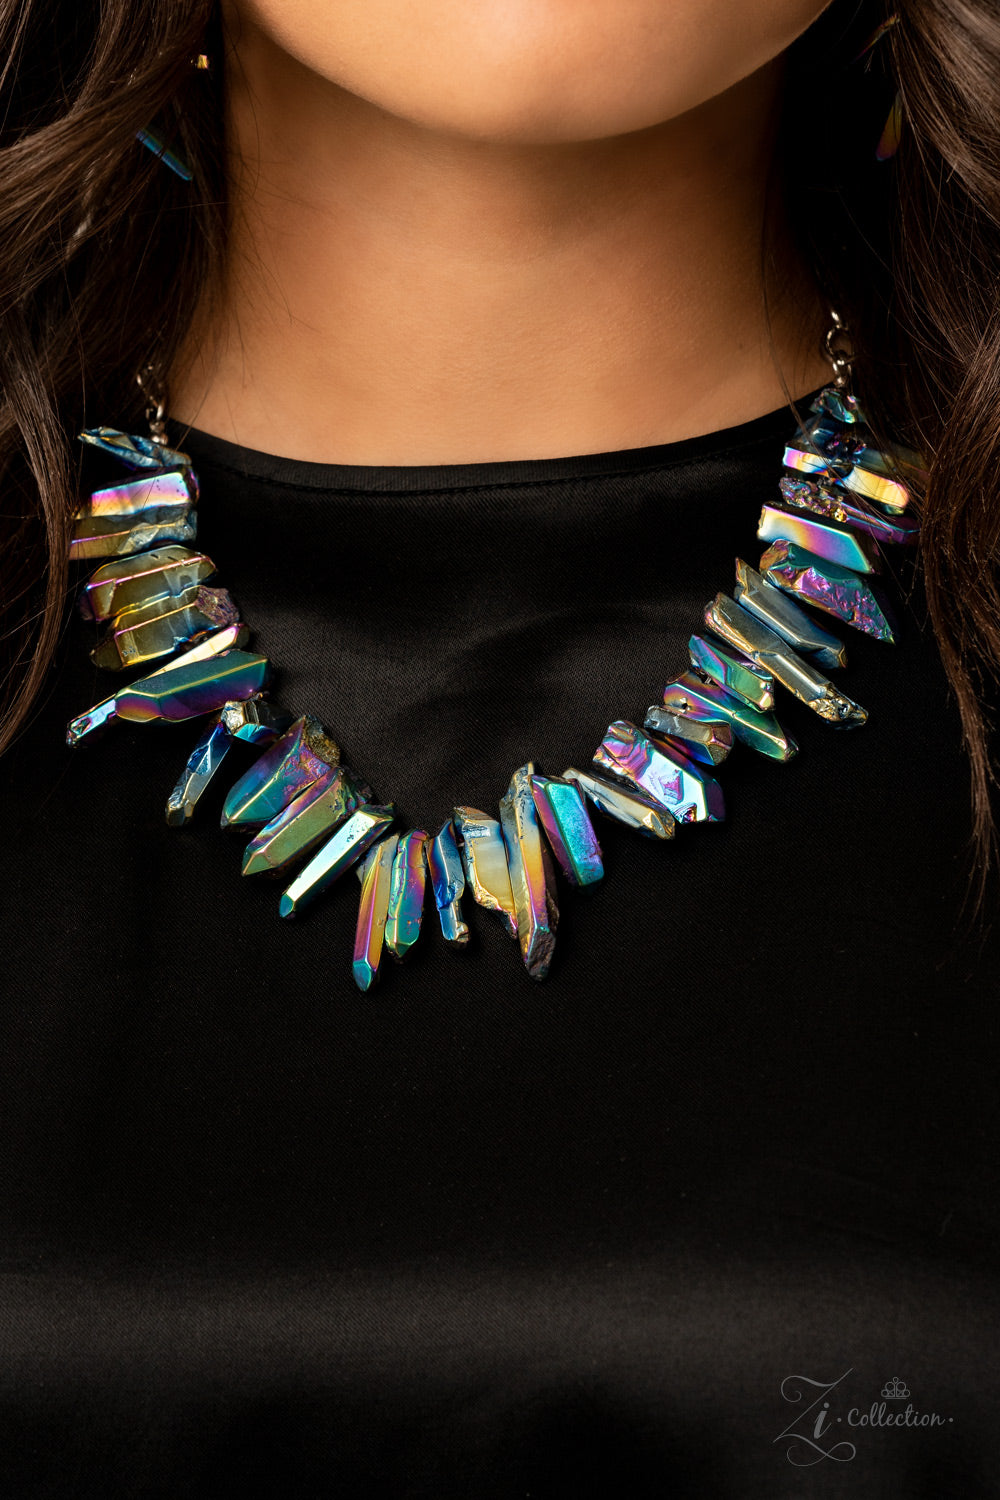 The Charismatic
Zi Collection Necklace - Daria's Blings N Things